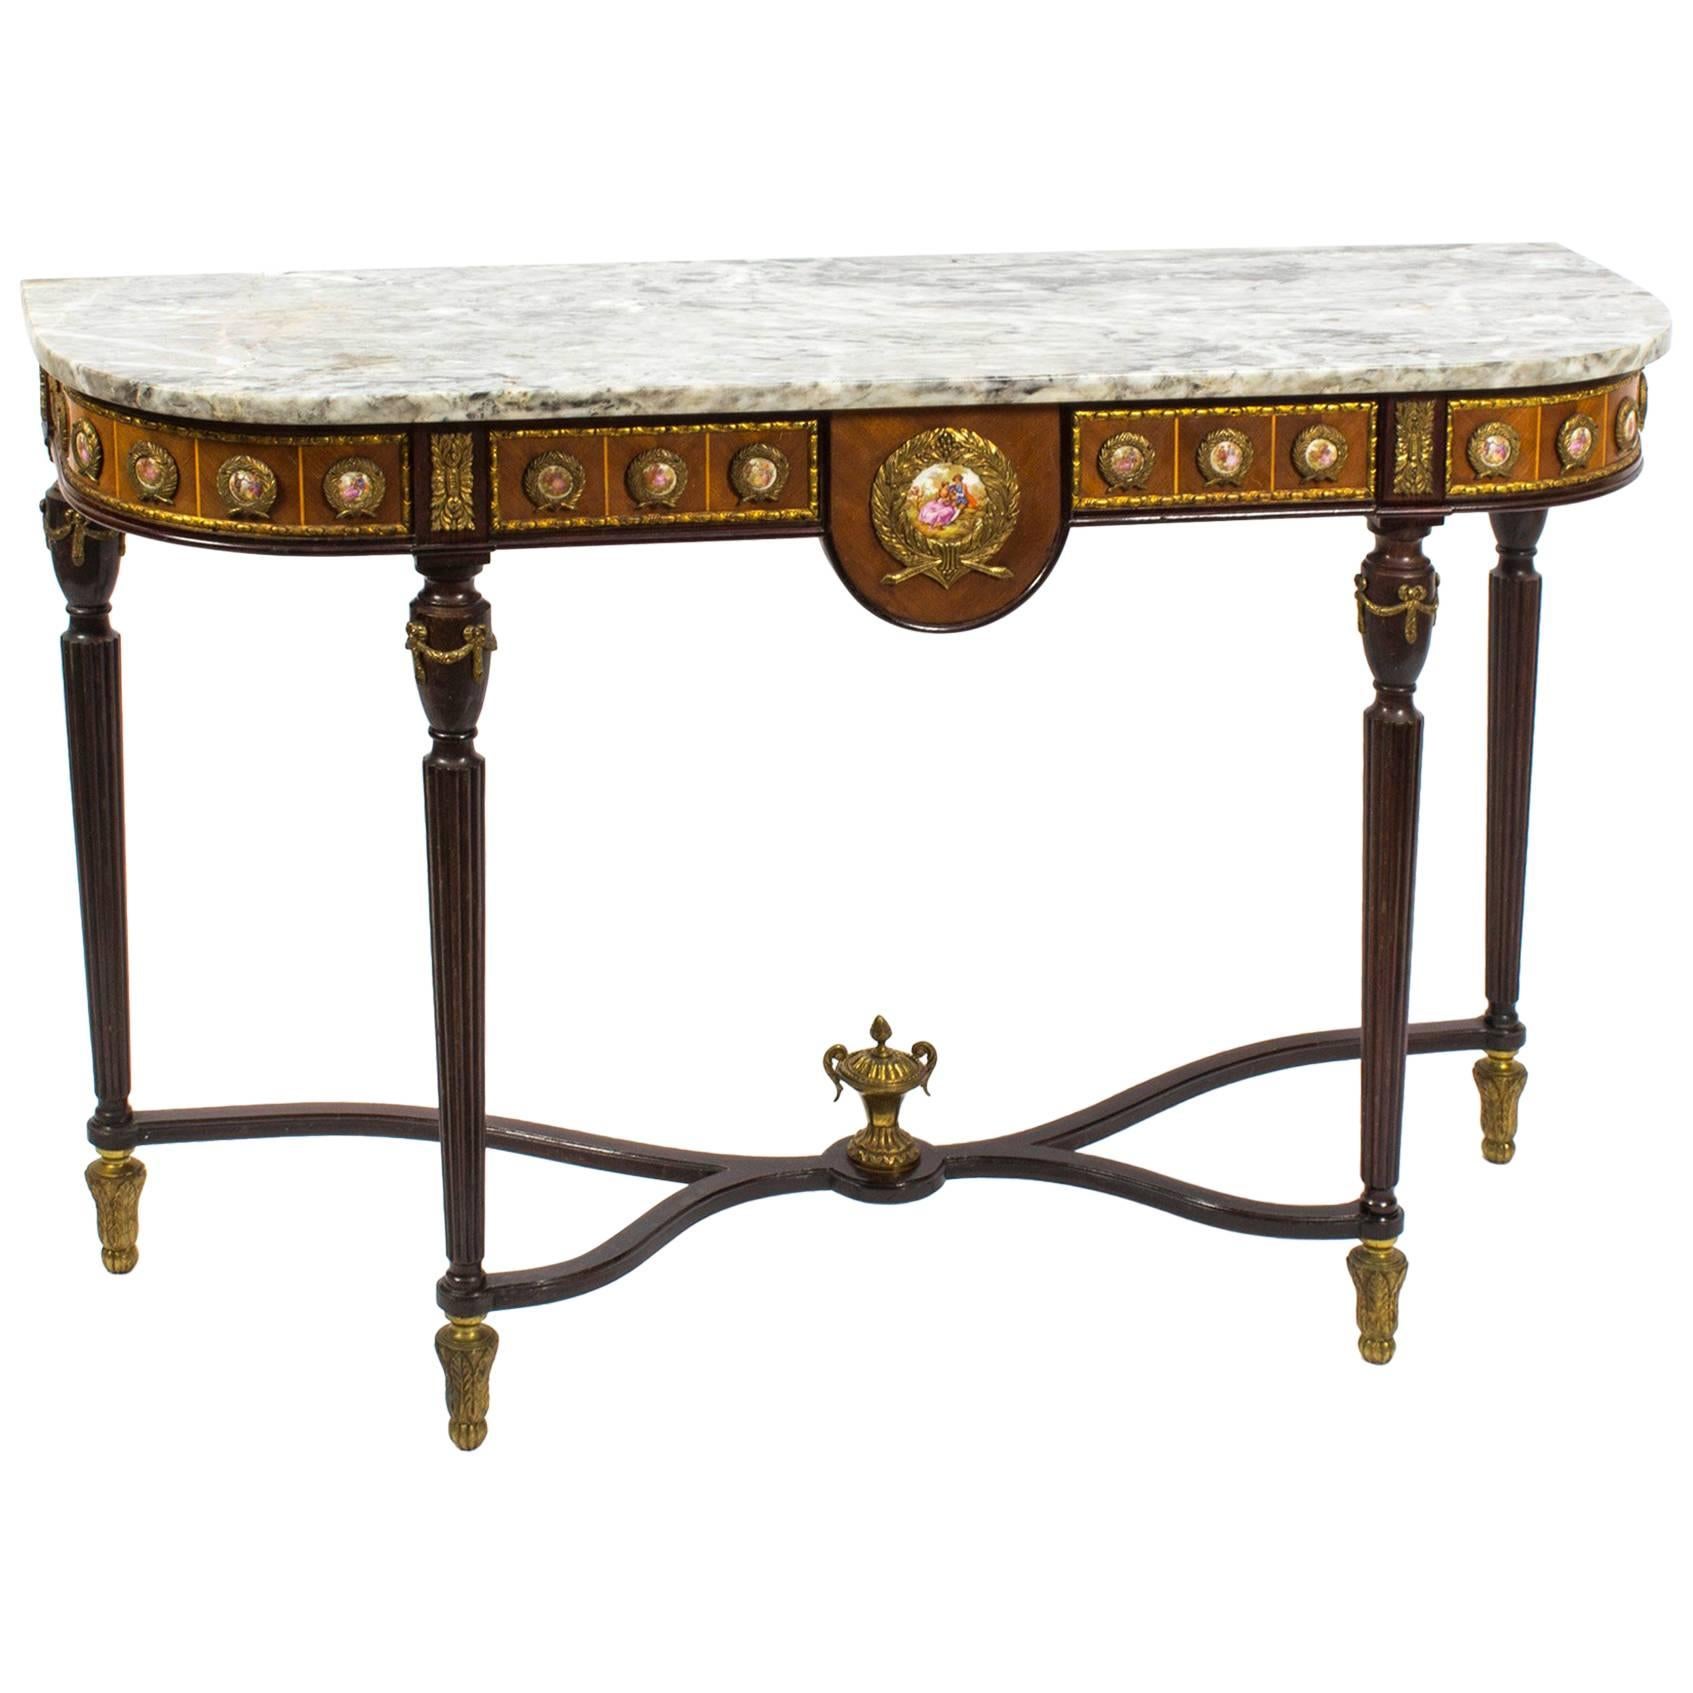 French Marble-Top Console Table Sevres Porcelain & Ormolu Mounts, 20th Century